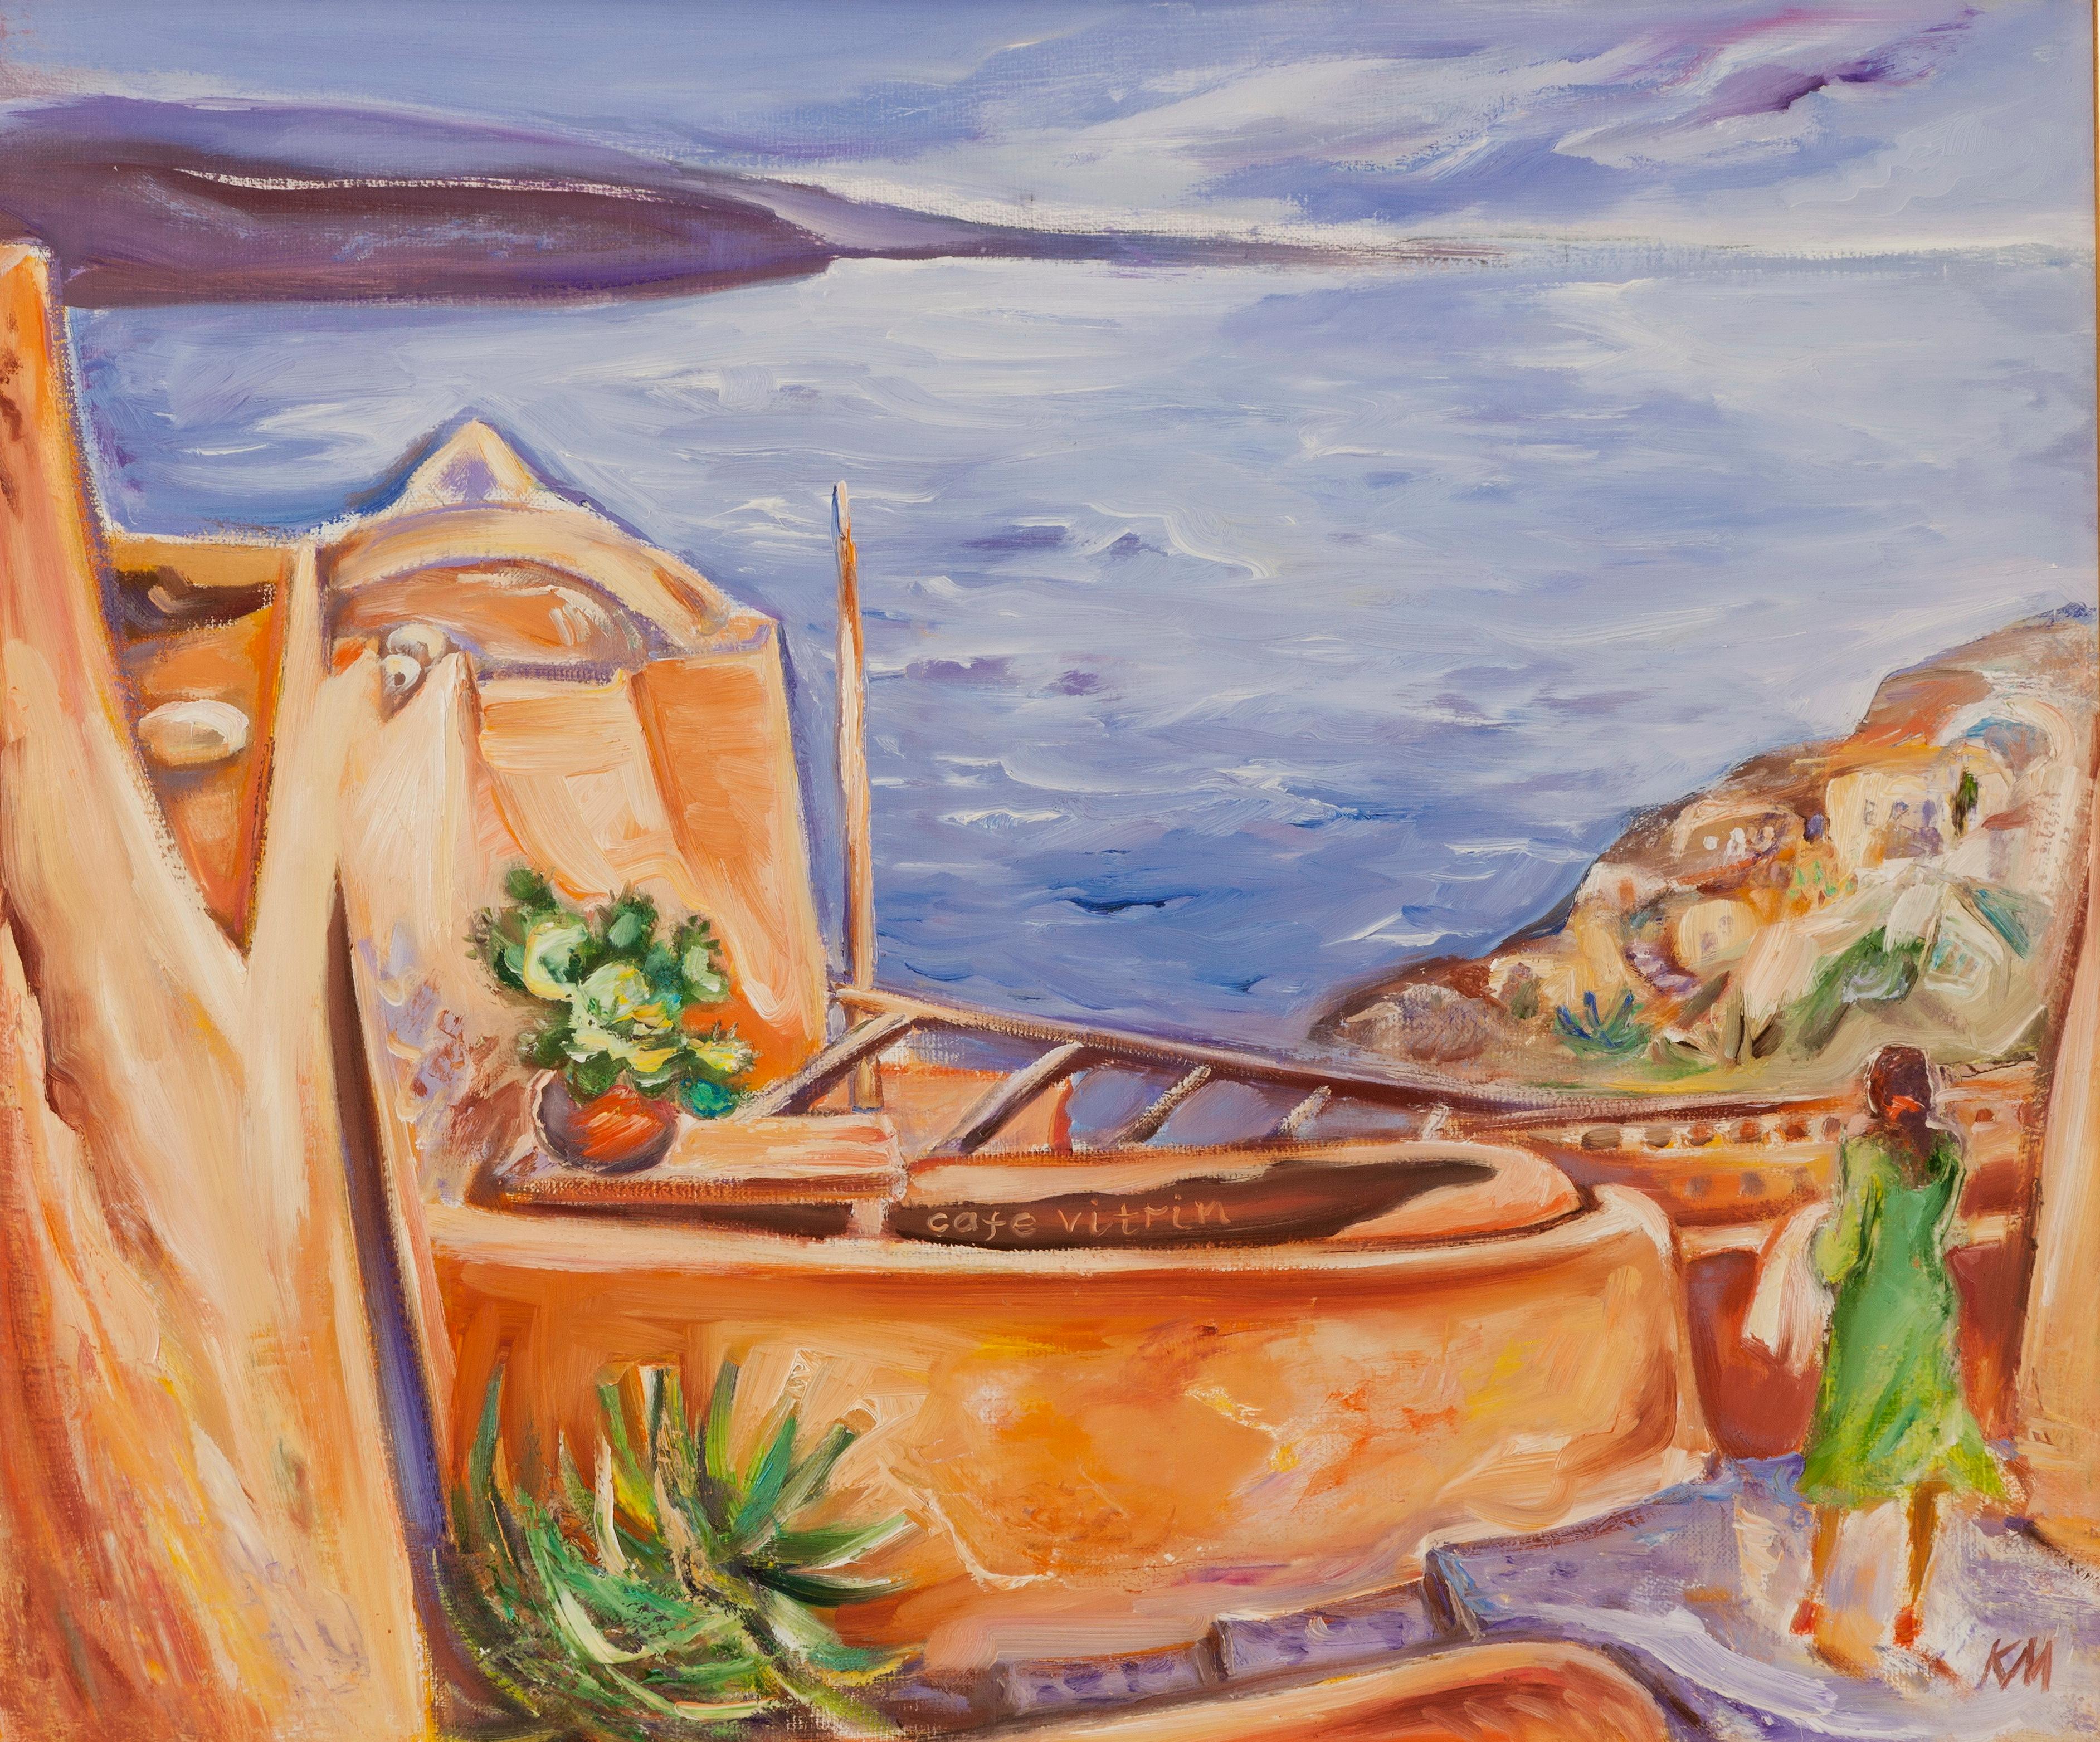 "Santorini, afternoon in Ia" is an modernist painting by Maestro Krassimira Mihaylova.

About the artwork:

TECHNIQUE:  oil painting
STYLE: Impressionist, Contemporary
Edition : Unique, signed
Weight: Approximately 2 kg.

The painting is